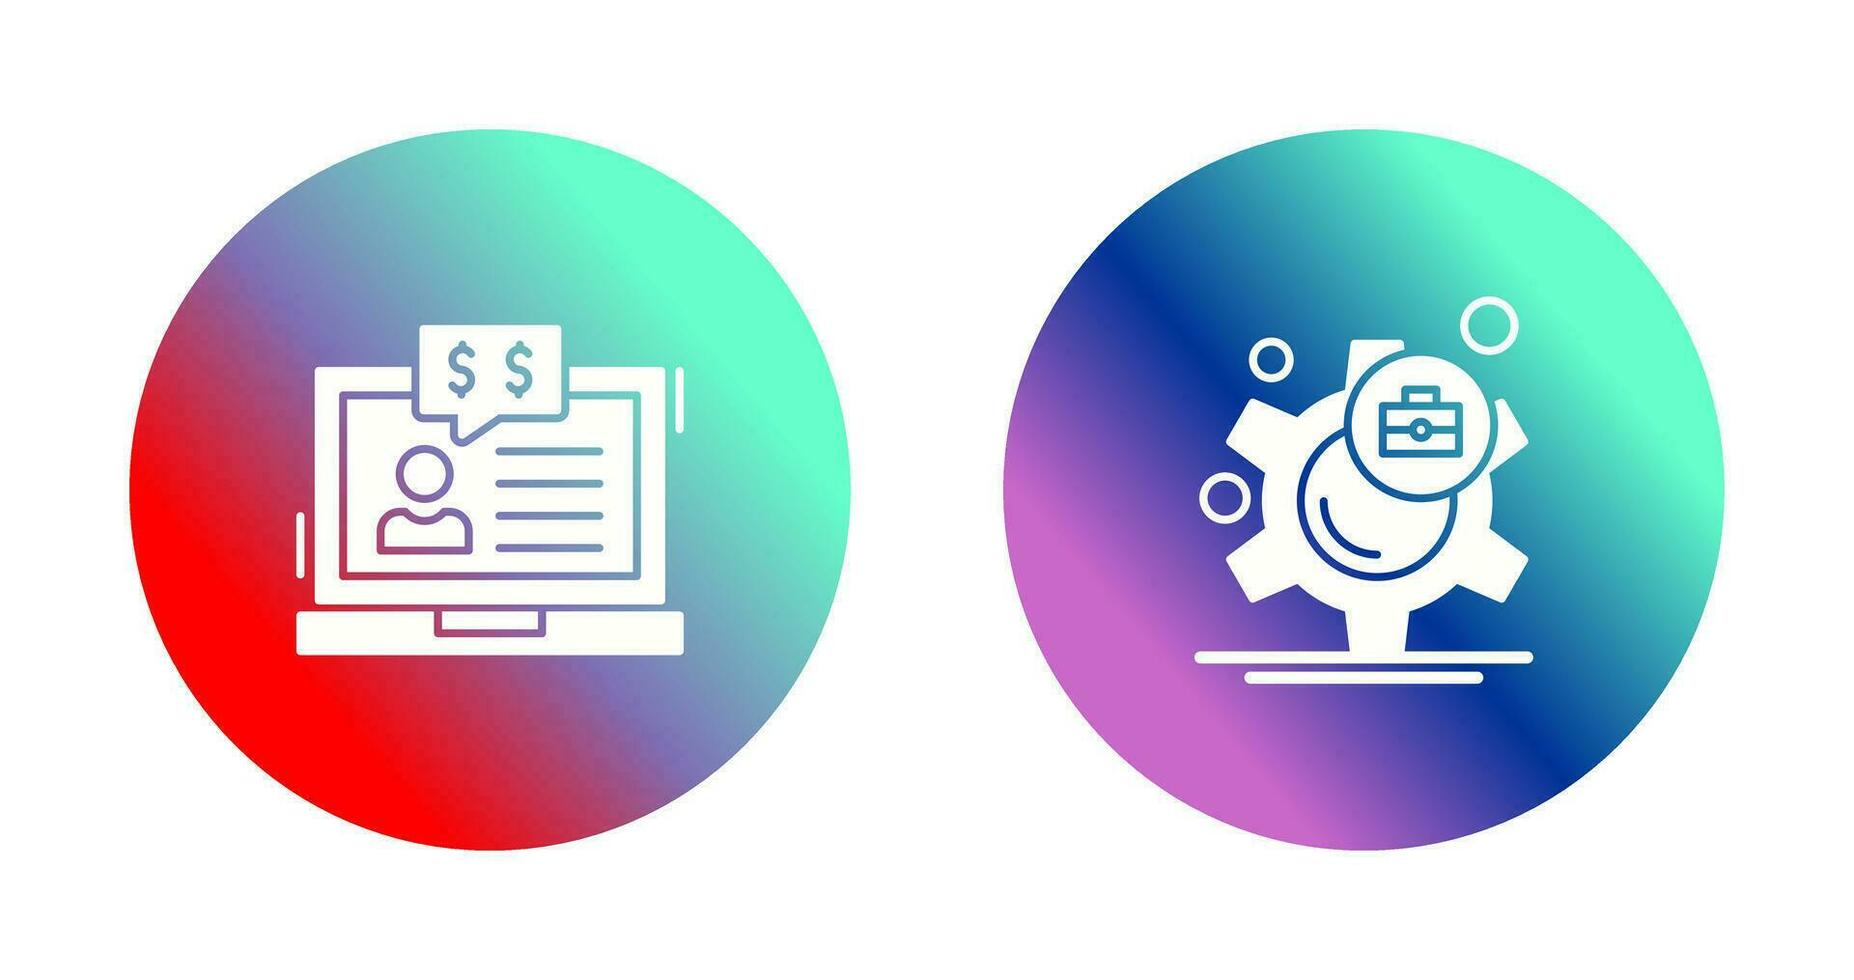 Employee Benefits and Employment Icon vector